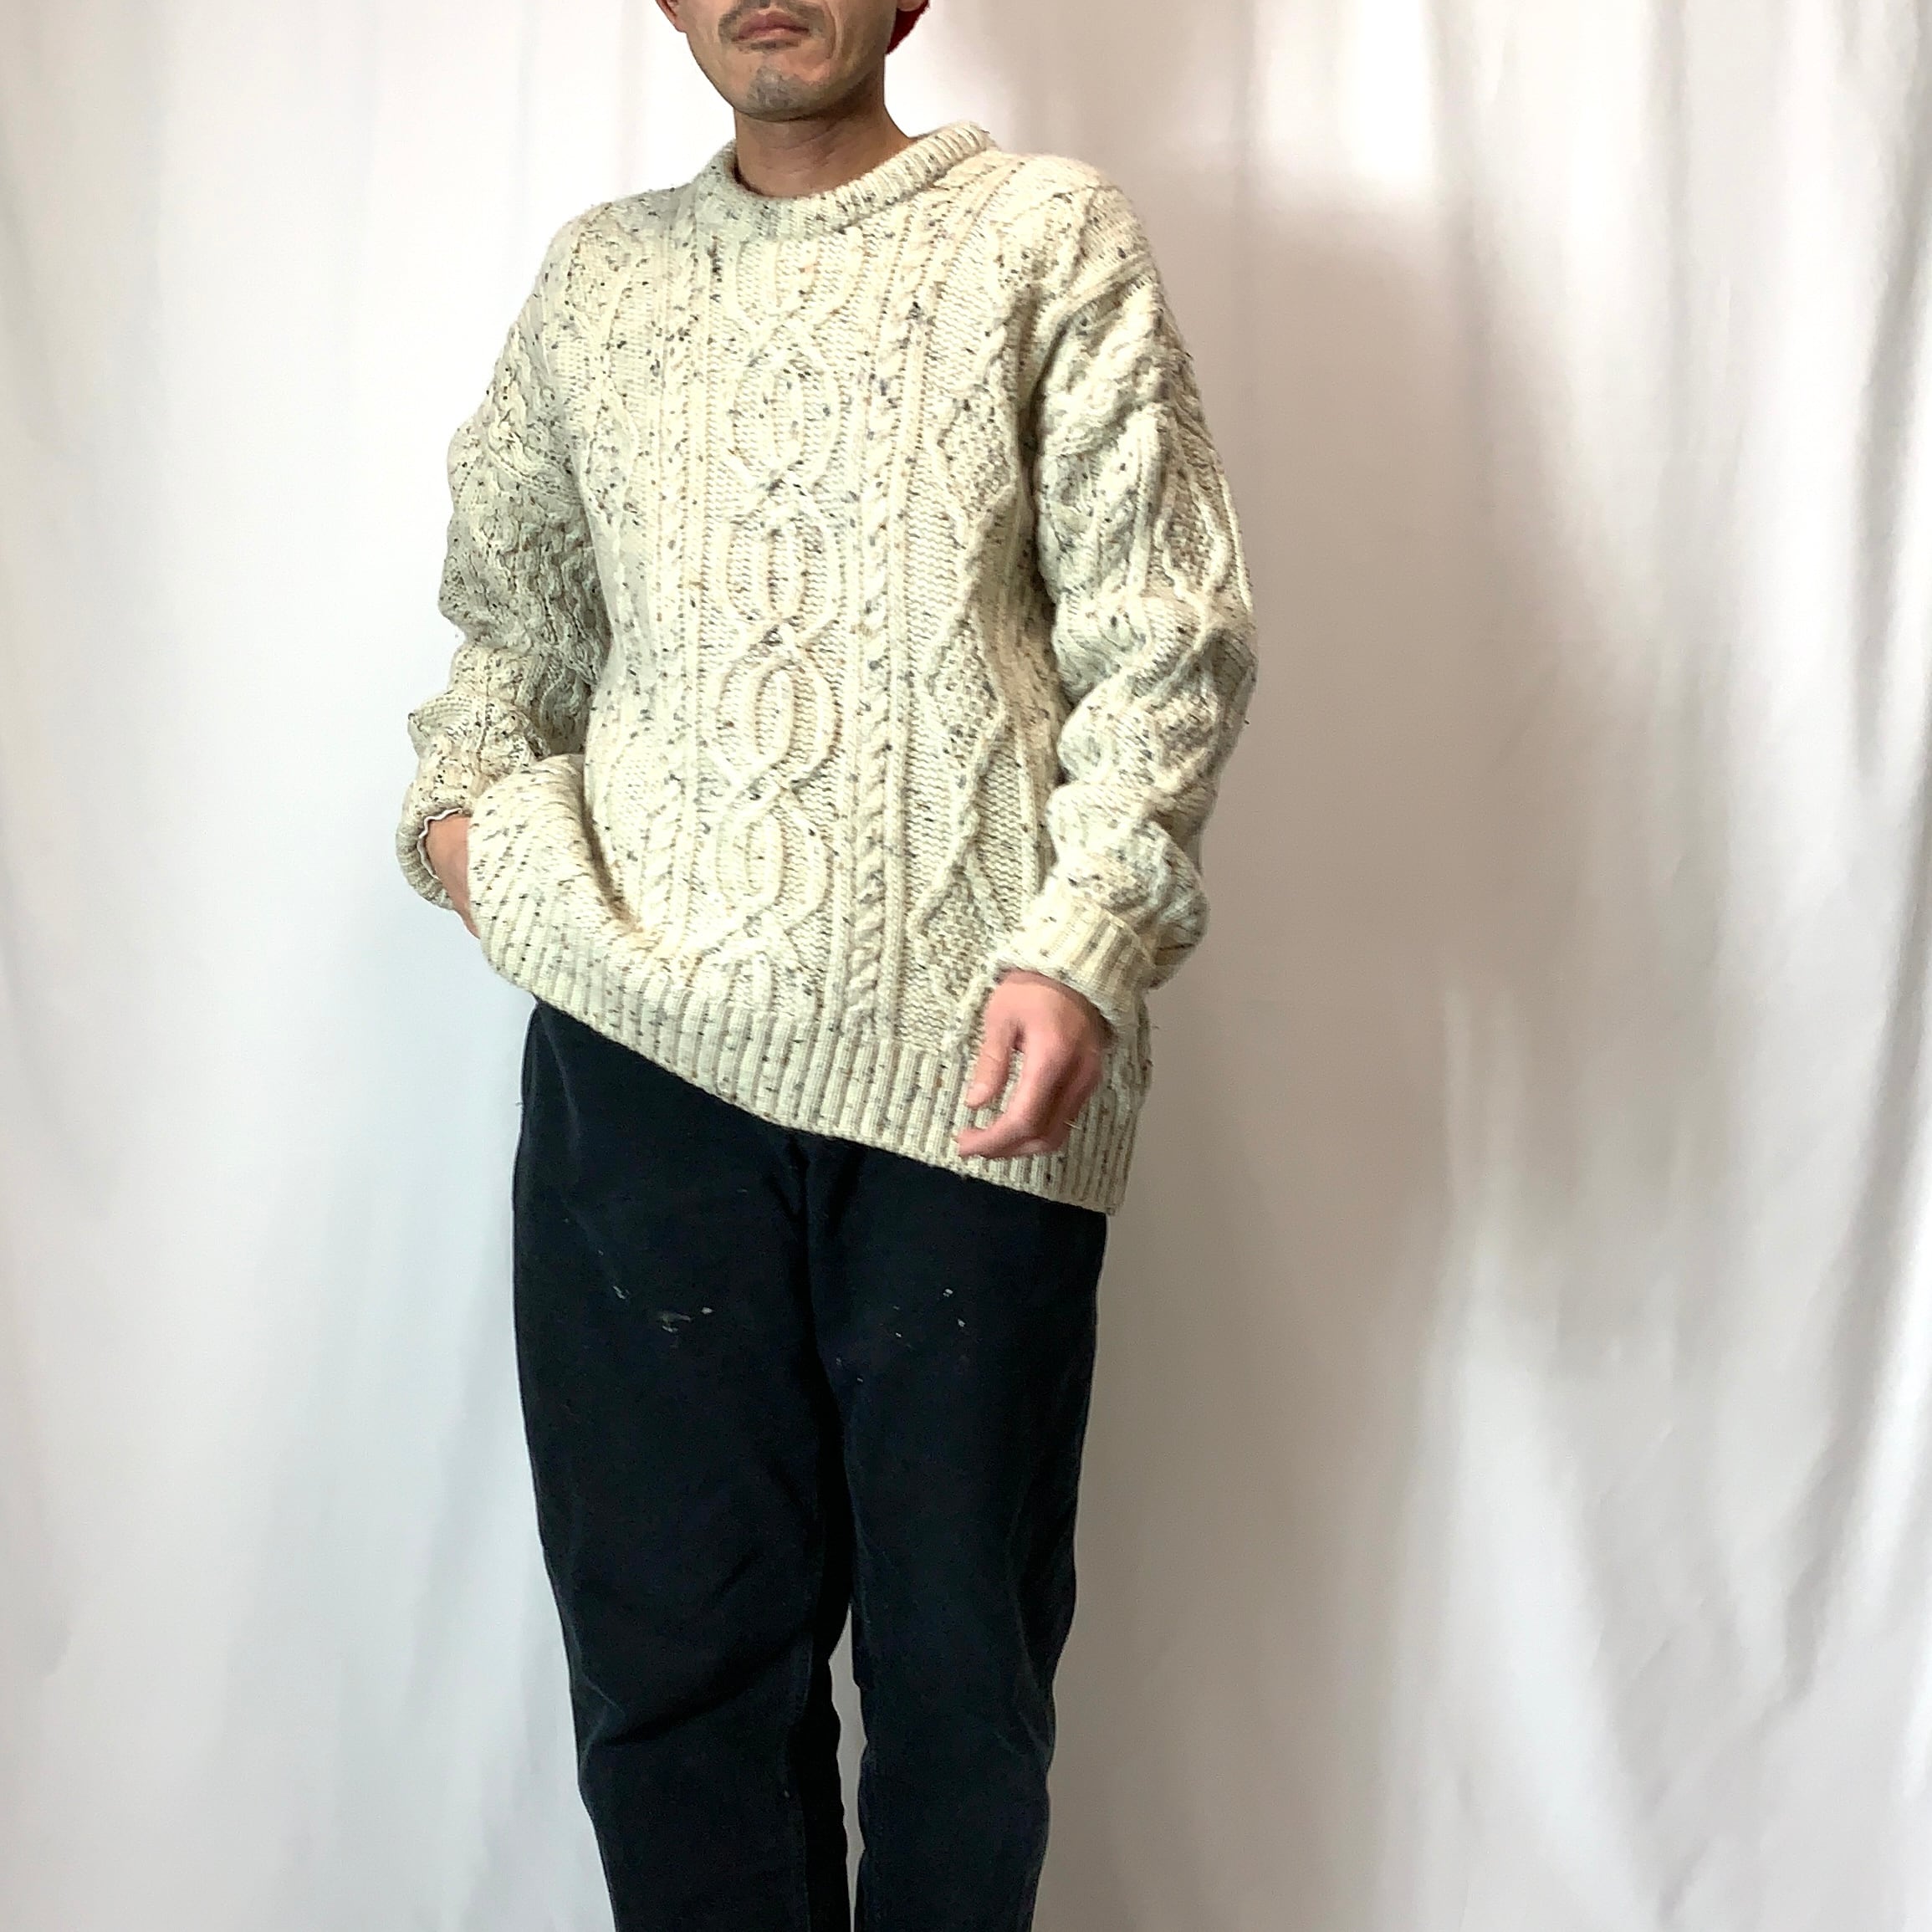 90s Callegiate Traditions "W" wool knit